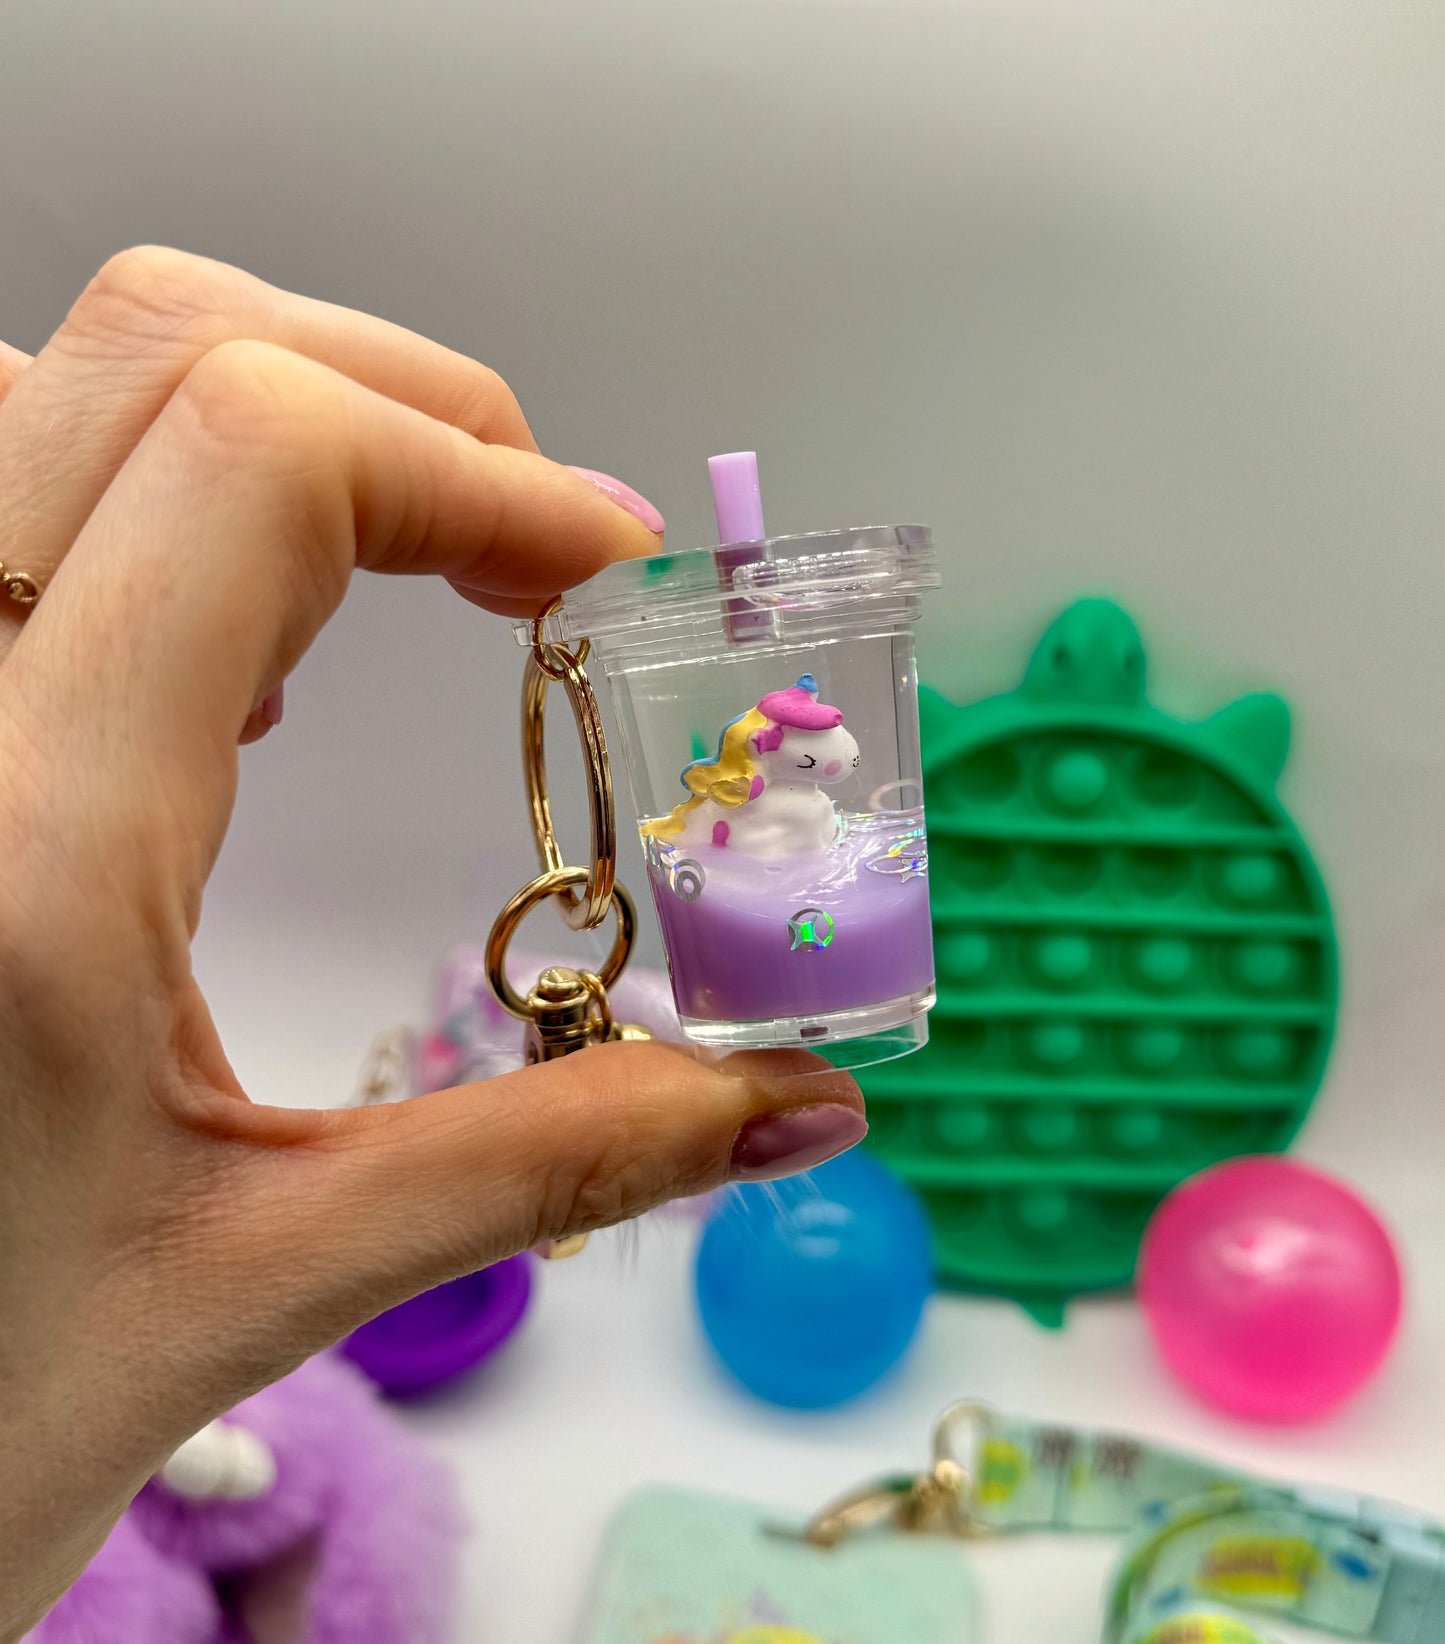 Comfort Keychain Of The Month Mystery Box (5 items) - Violet 💜🐰